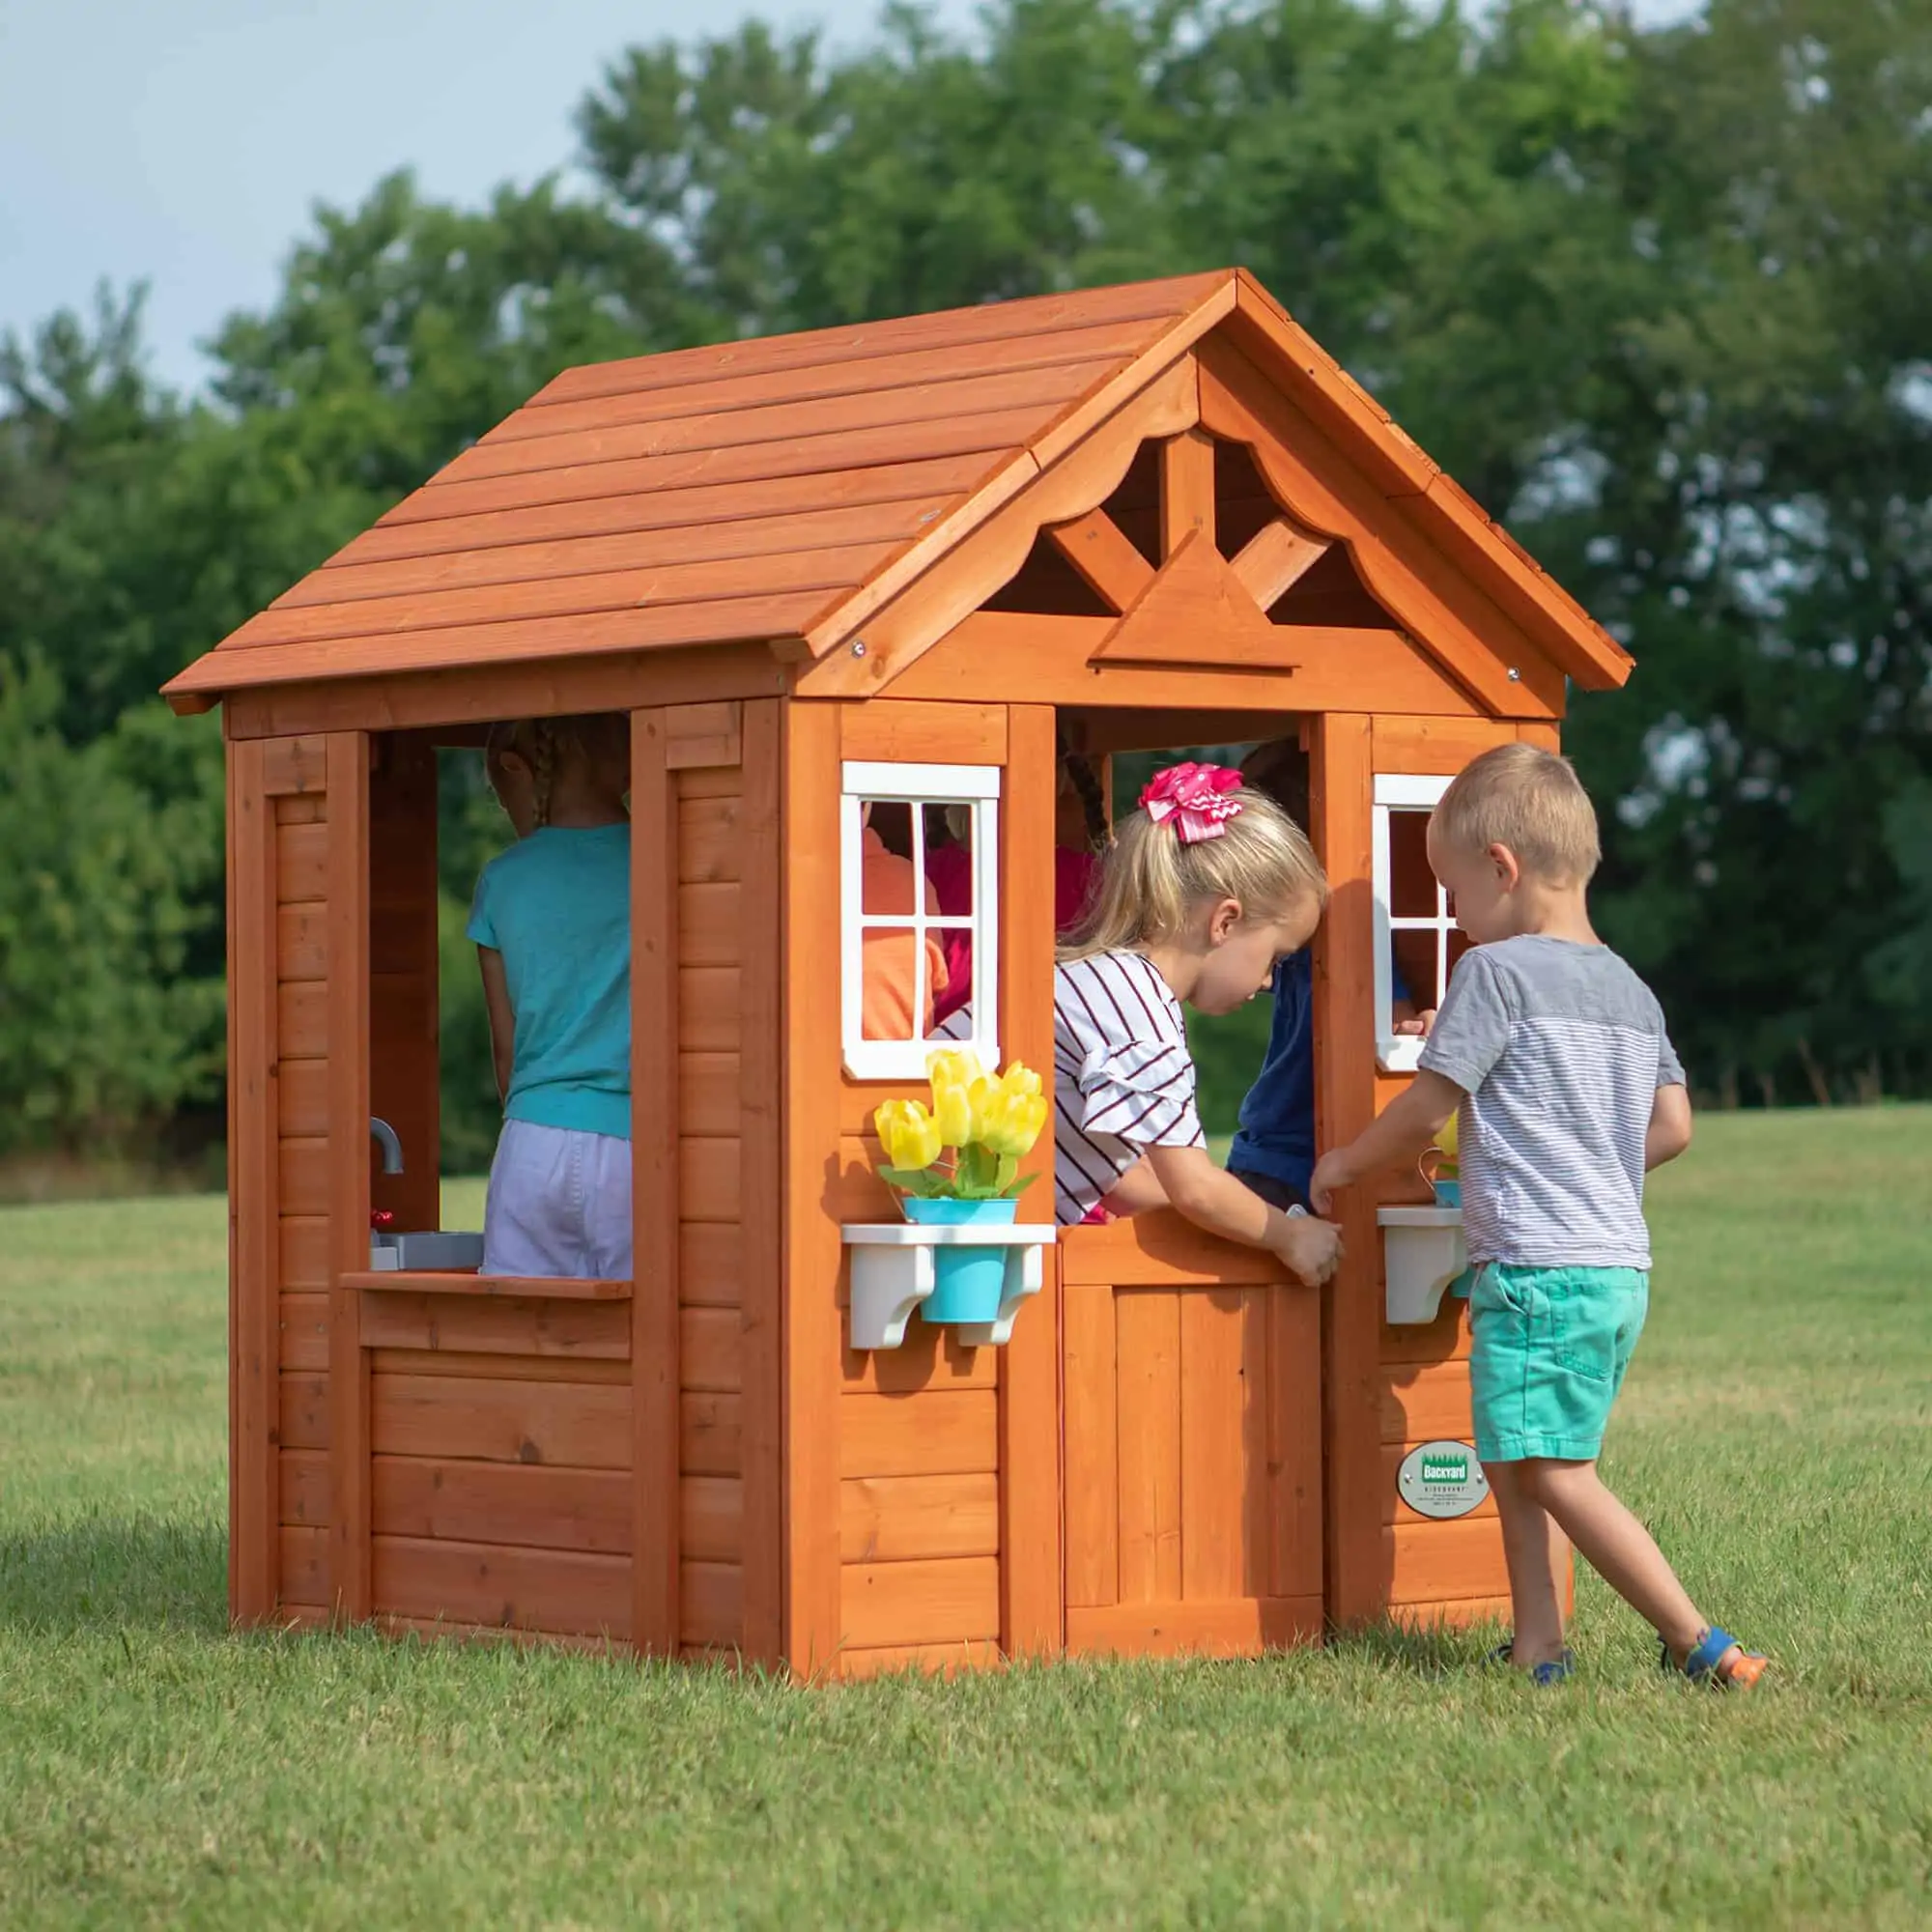 Timberlake cedar wooden playhouse with children playing together.